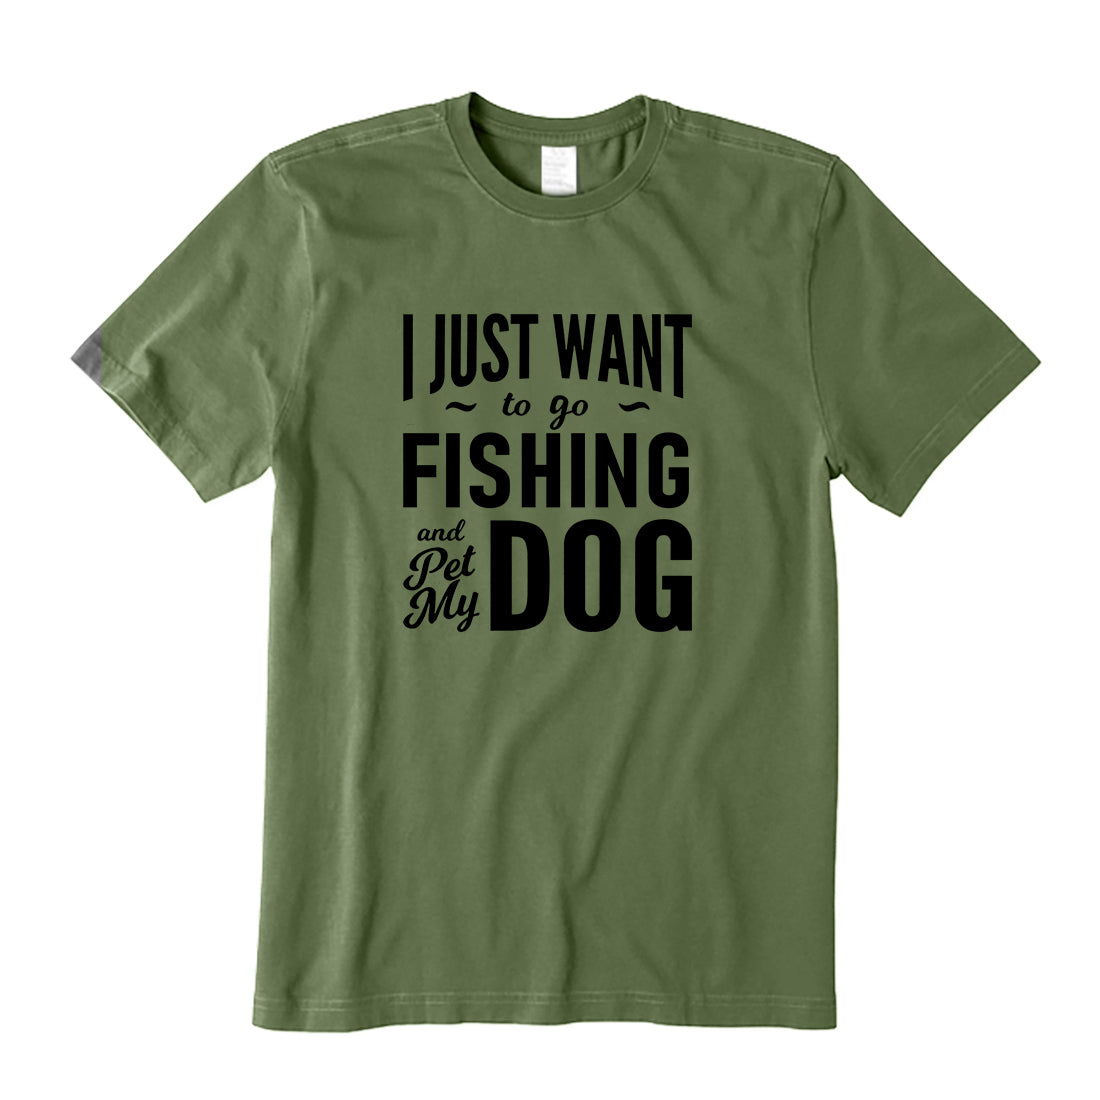 I Just Want to Go Fishing and Pet My Dog T-Shirt